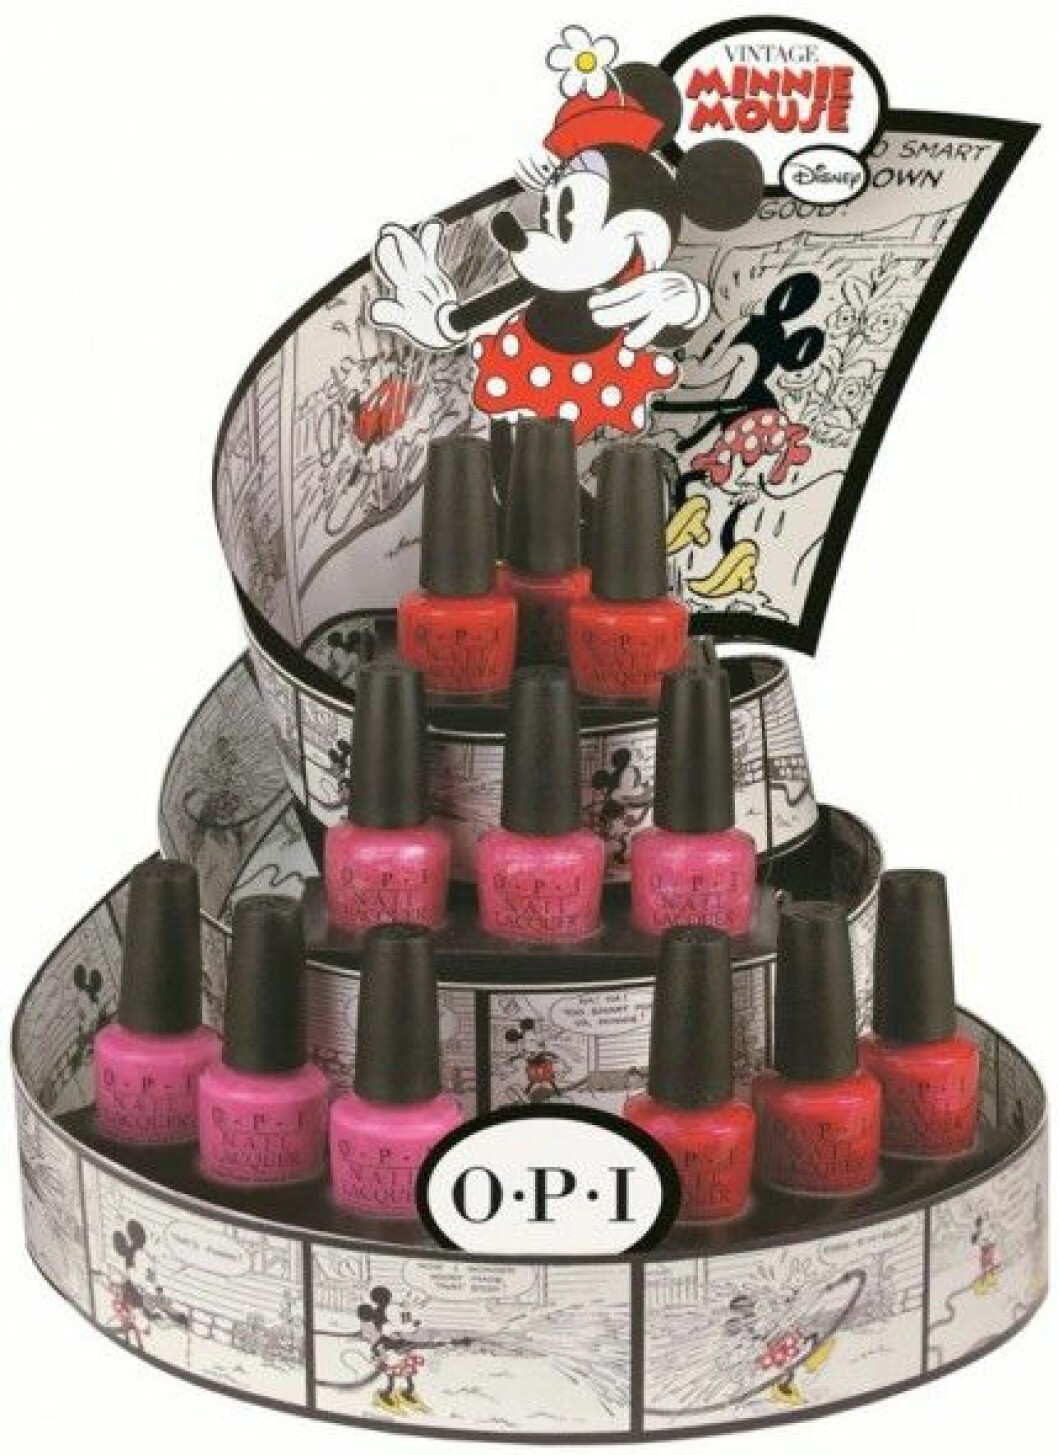 Vintage Minnie Mouse Collection by OPI.